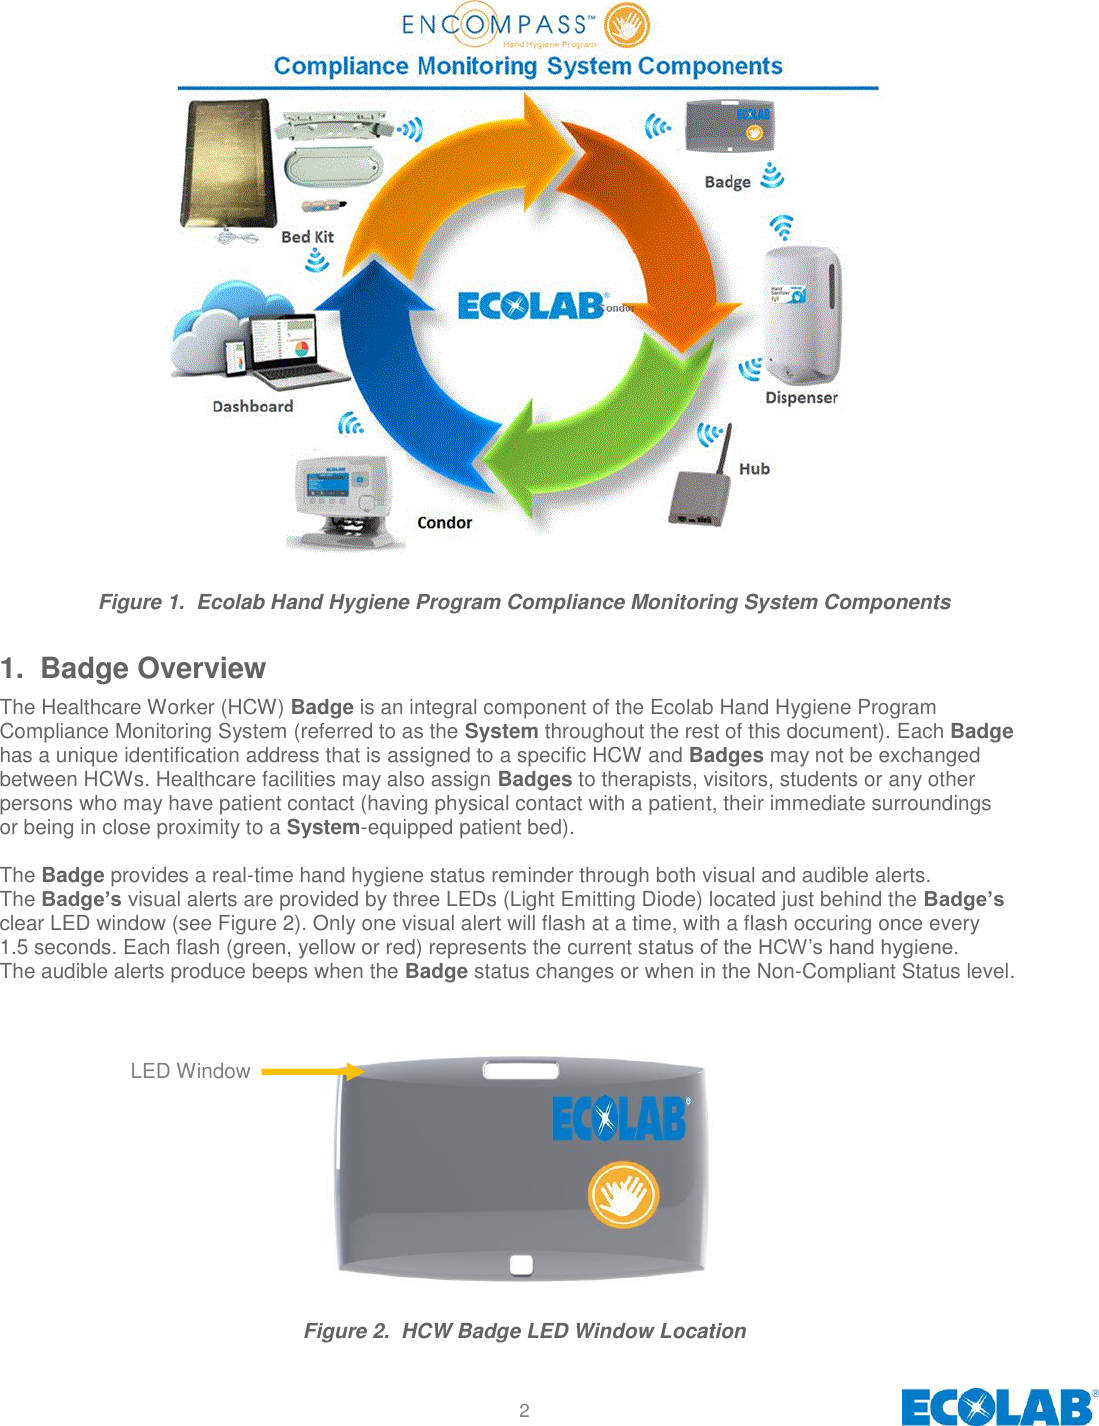 2                           Figure 1.  Ecolab Hand Hygiene Program Compliance Monitoring System Components 1.  Badge Overview The Healthcare Worker (HCW) Badge is an integral component of the Ecolab Hand Hygiene Program Compliance Monitoring System (referred to as the System throughout the rest of this document). Each Badge has a unique identification address that is assigned to a specific HCW and Badges may not be exchanged between HCWs. Healthcare facilities may also assign Badges to therapists, visitors, students or any other persons who may have patient contact (having physical contact with a patient, their immediate surroundings or being in close proximity to a System-equipped patient bed).   The Badge provides a real-time hand hygiene status reminder through both visual and audible alerts. The Badge’s visual alerts are provided by three LEDs (Light Emitting Diode) located just behind the Badge’s clear LED window (see Figure 2). Only one visual alert will flash at a time, with a flash occuring once every 1.5 seconds. Each flash (green, yellow or red) represents the current status of the HCW’s hand hygiene. The audible alerts produce beeps when the Badge status changes or when in the Non-Compliant Status level.               Figure 2.  HCW Badge LED Window Location LED Window 